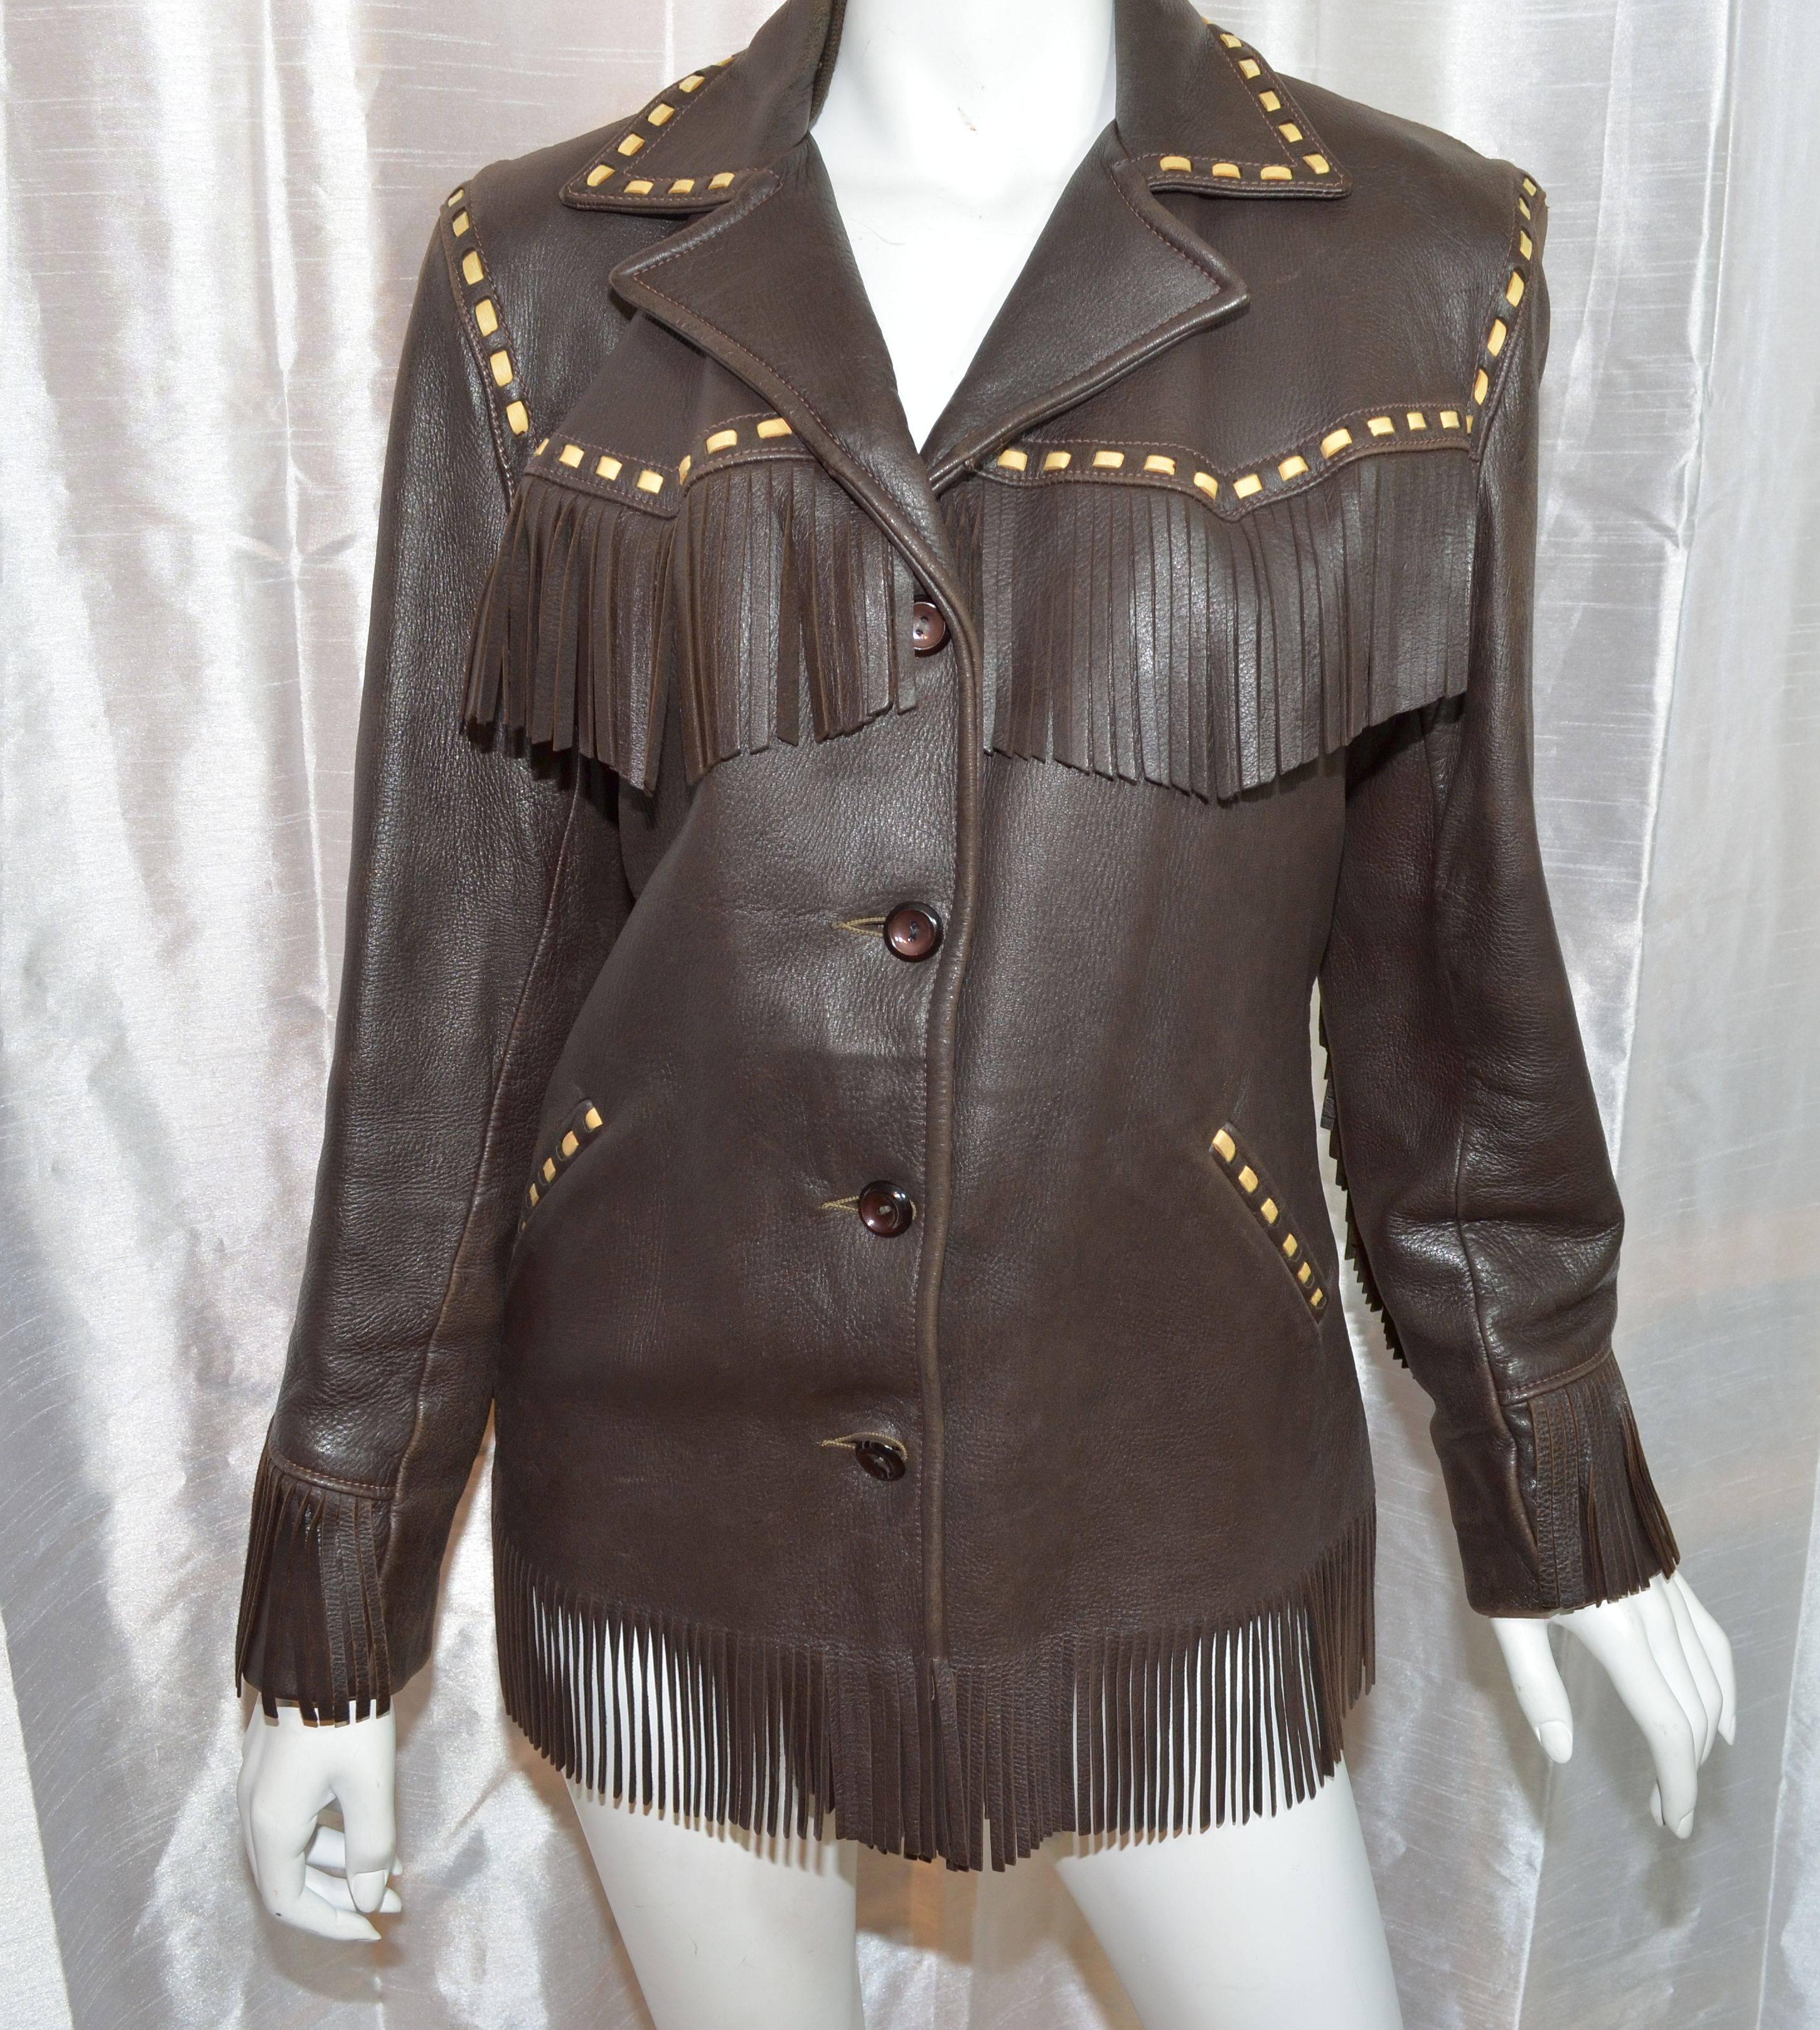 Vintage jacket is made of 100% genuine deerskin leather, featured in a brown color with tan leather trimmings laced along the collar and two front pockets, there are button closures along the front, and a full lining. 
Measurements: 
bust - 42'',